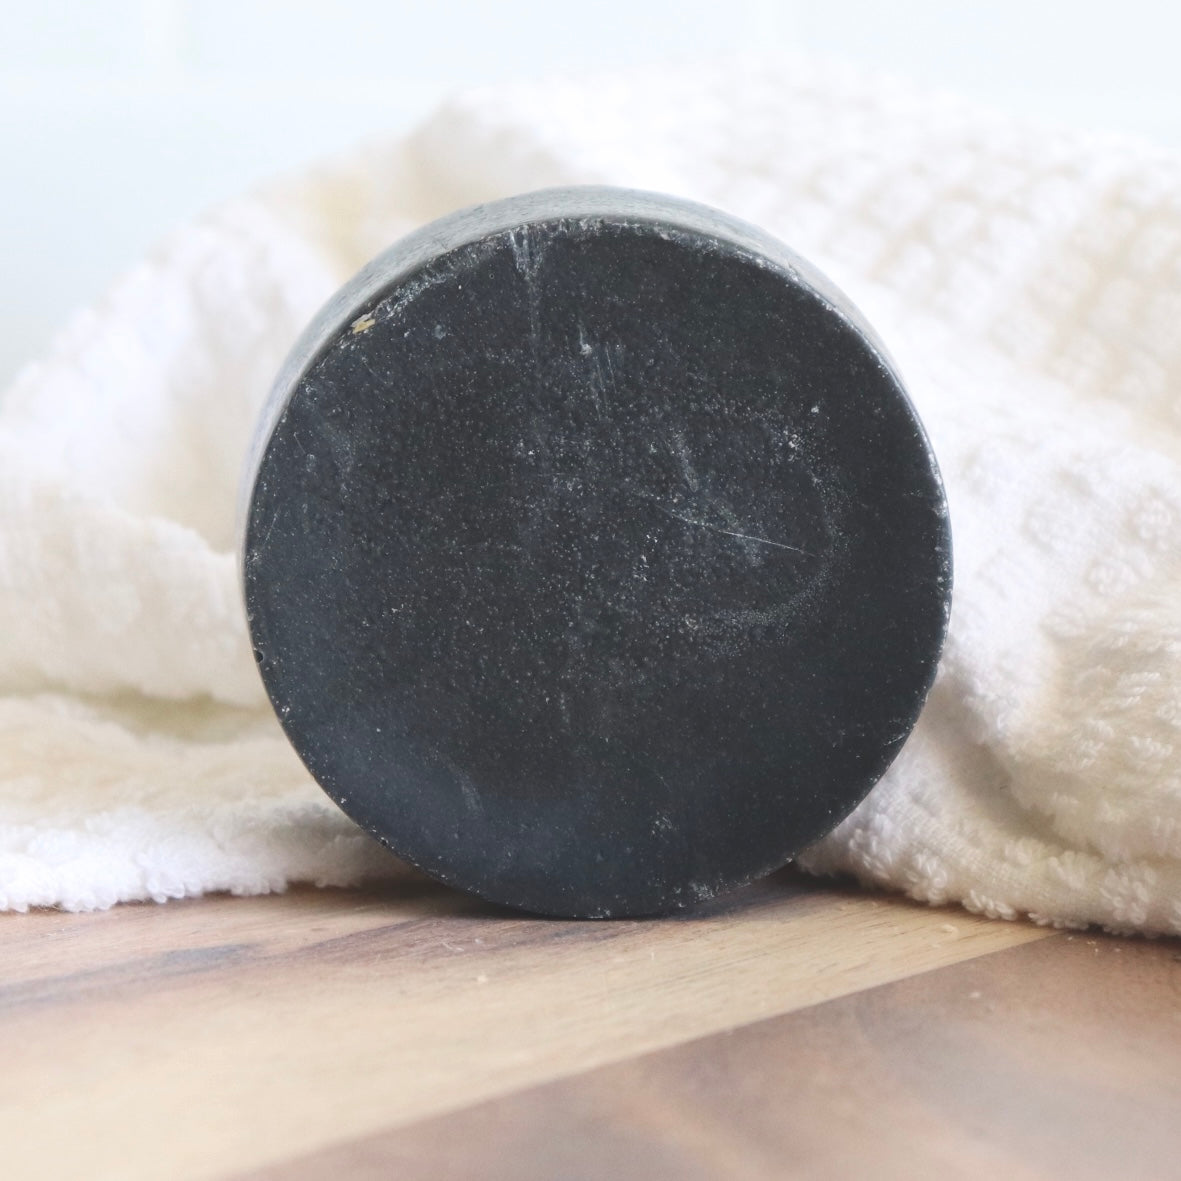 Charcoal Shave Soap Bar